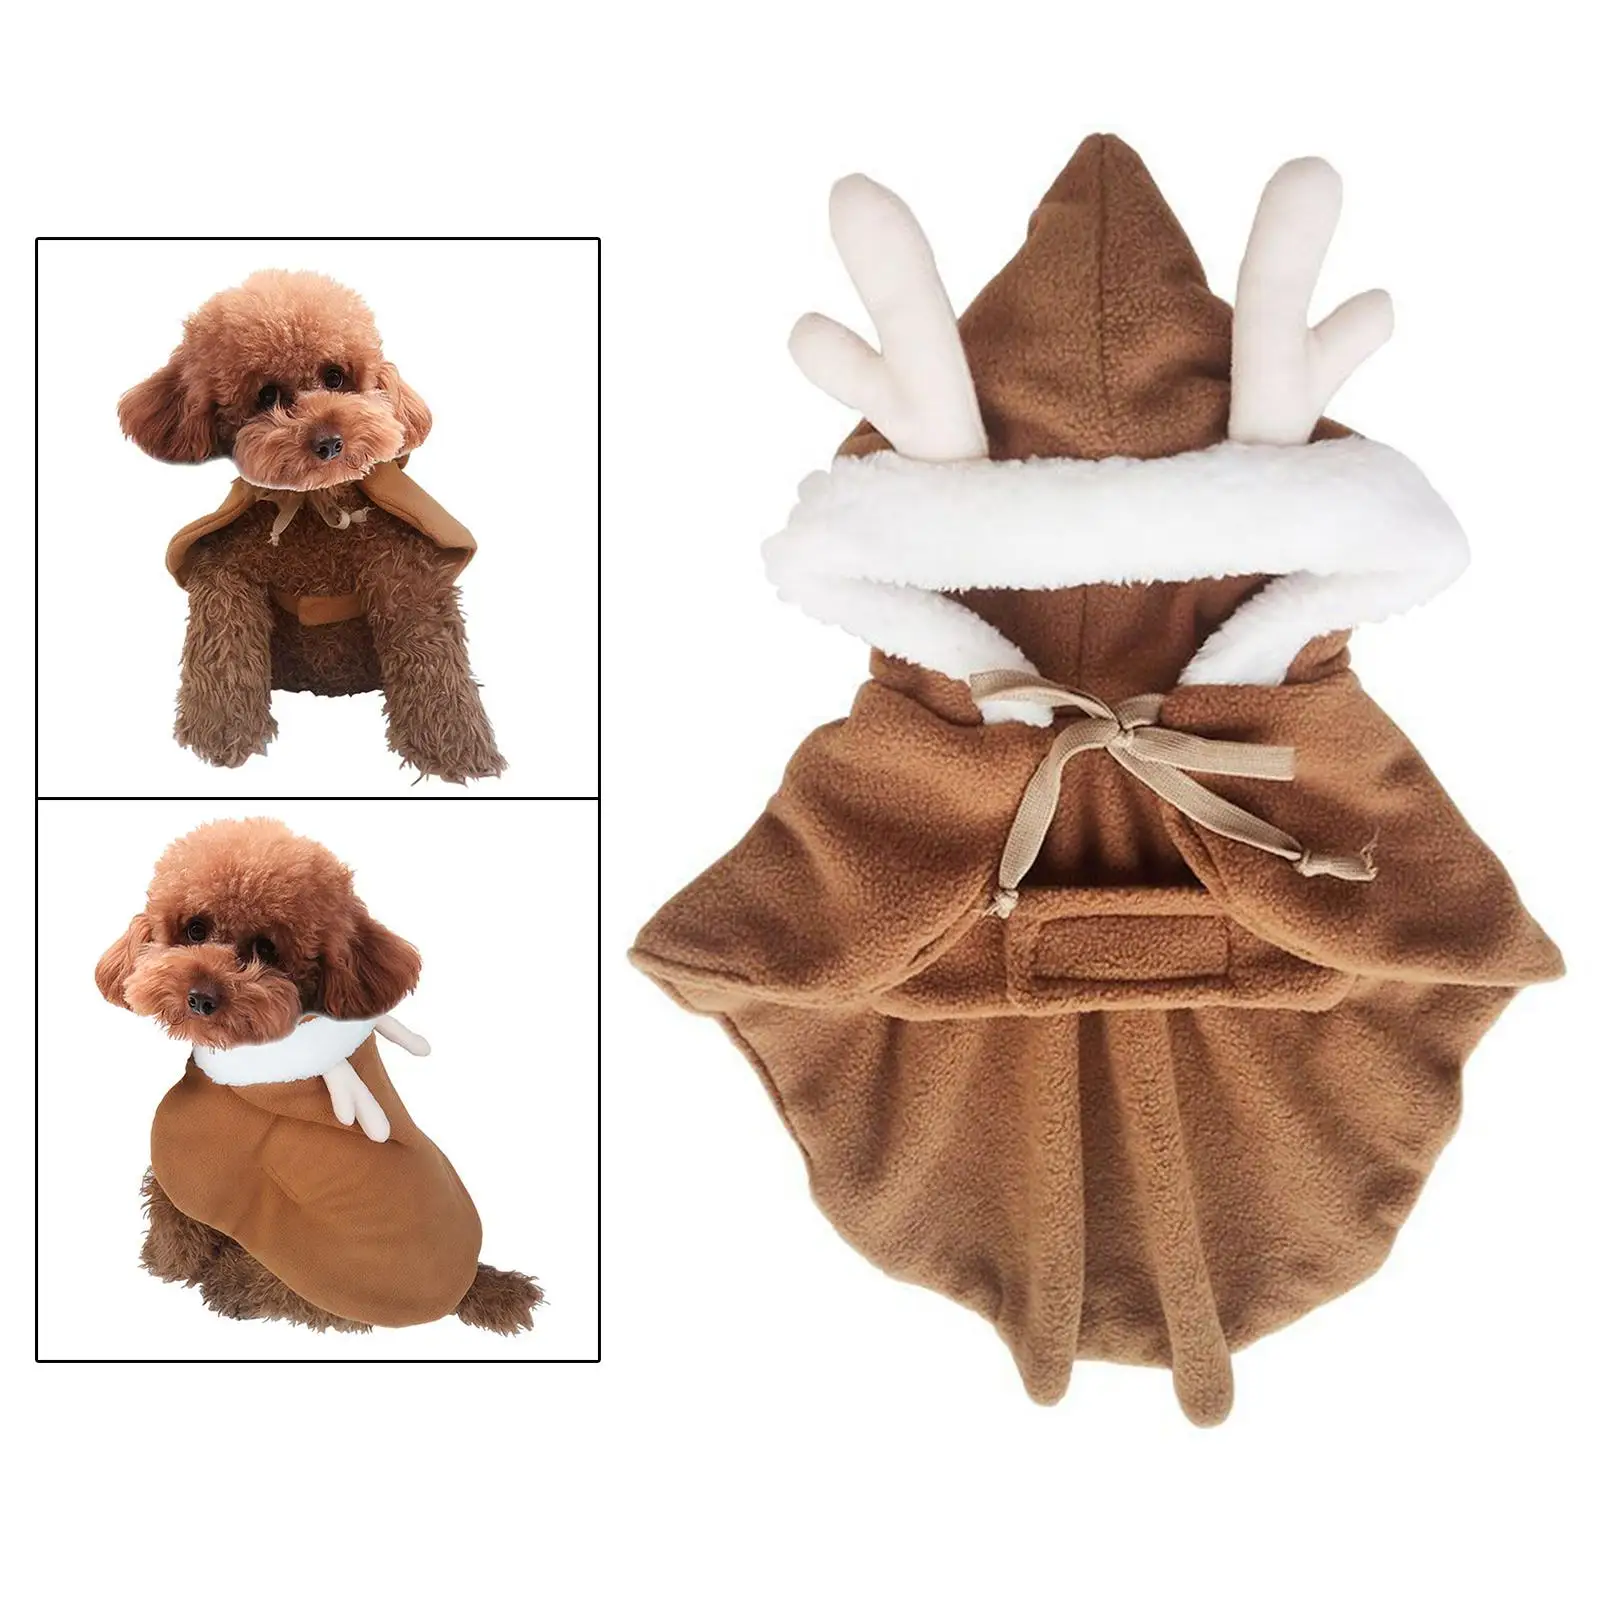 Puppy Xmas Cloak Soft Outfits with Reindeer Antlers Party Cosplay Dress Pajamas Pet Christmas Costume for Small Dogs Cats